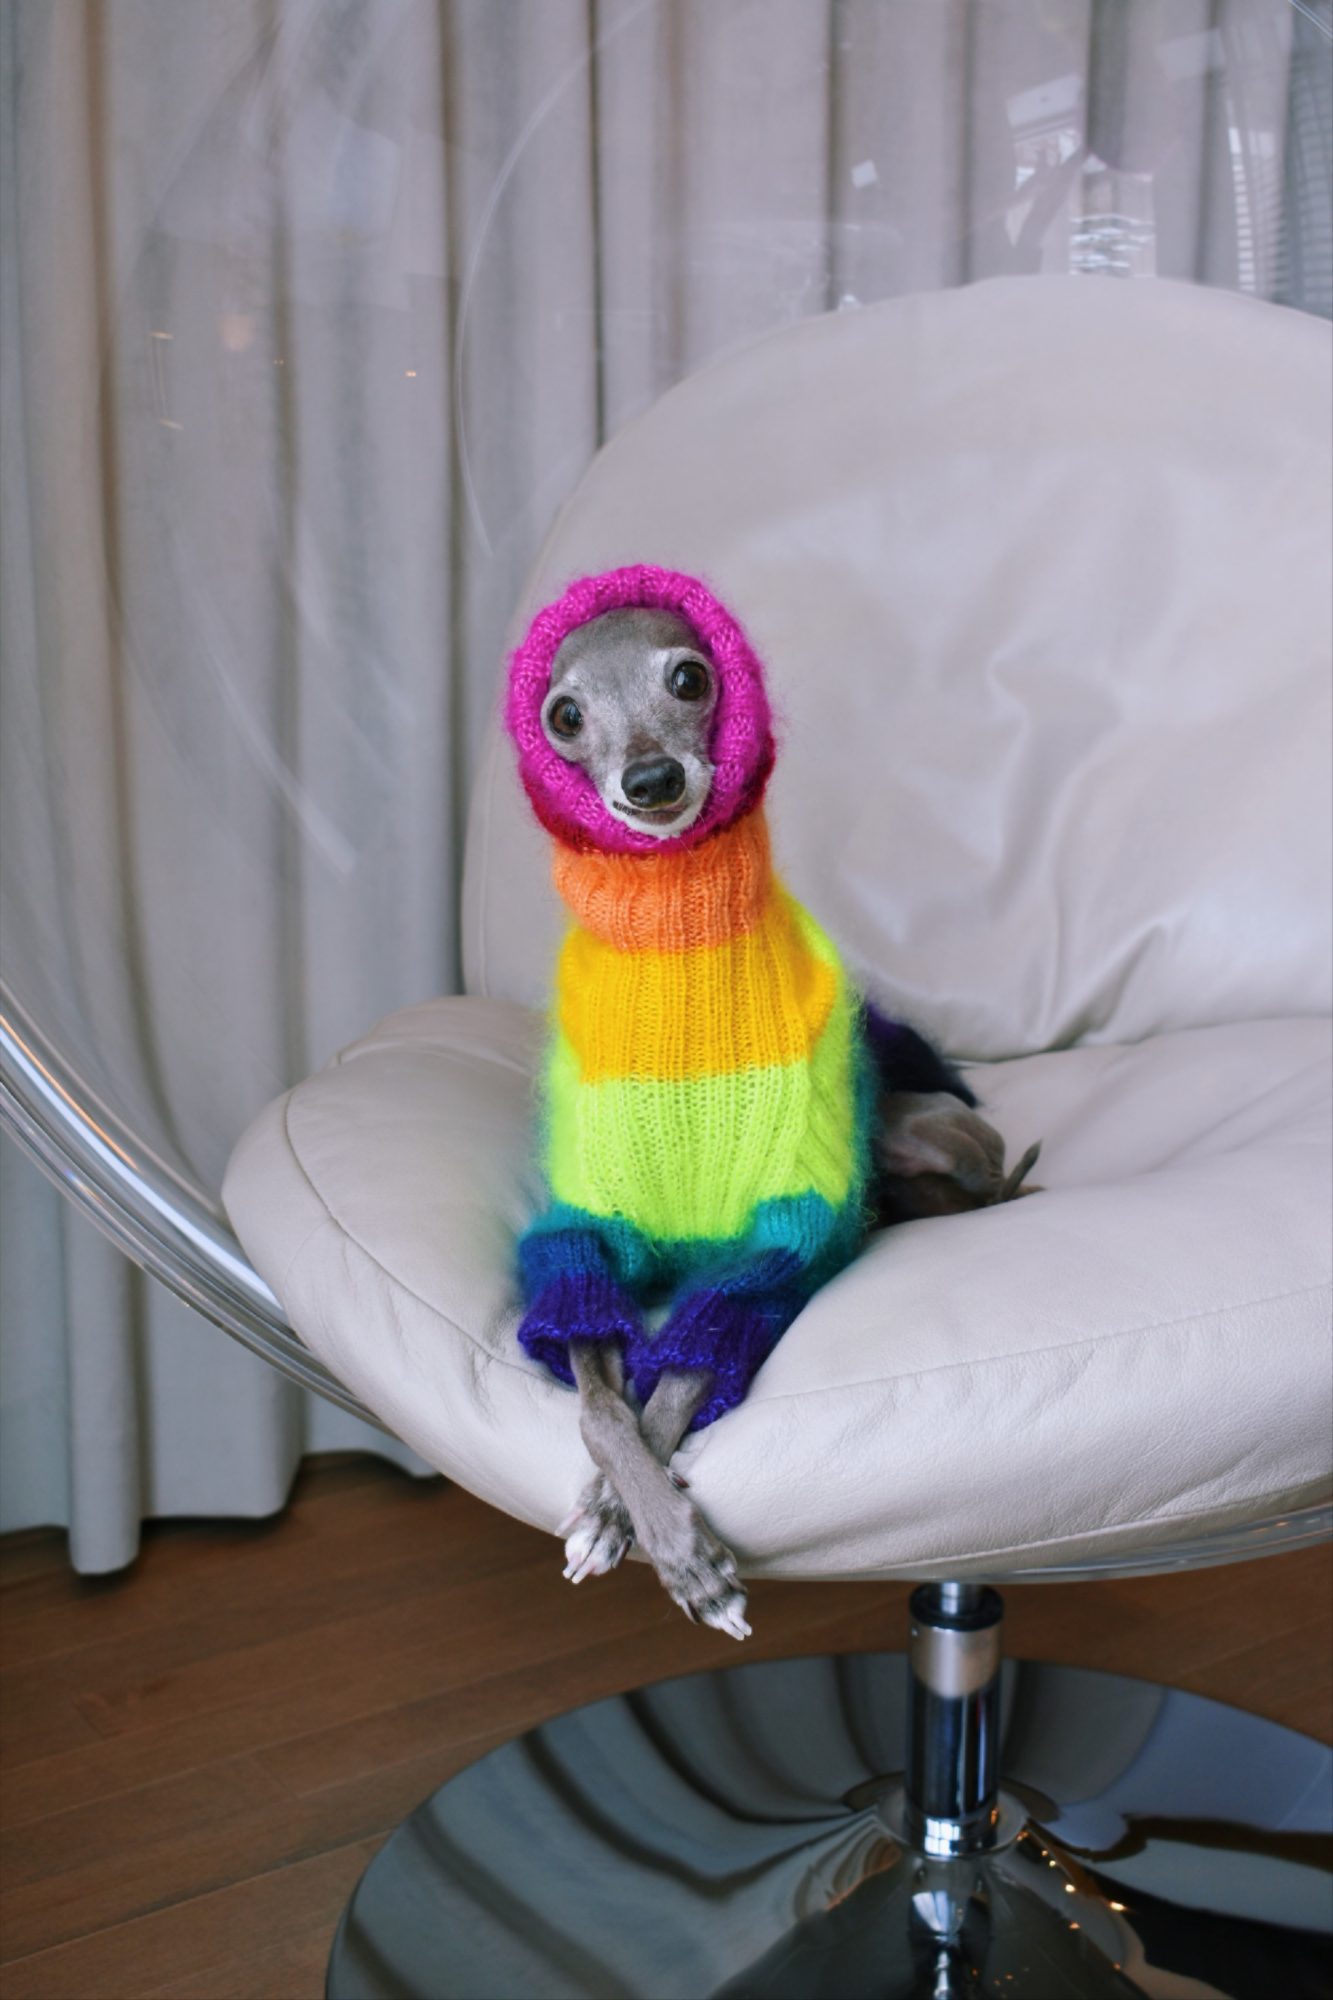 Tika the Iggy wearing a rainbow turtleneck. Her paws are crossed and she is sitting in a plastic bubble chair.